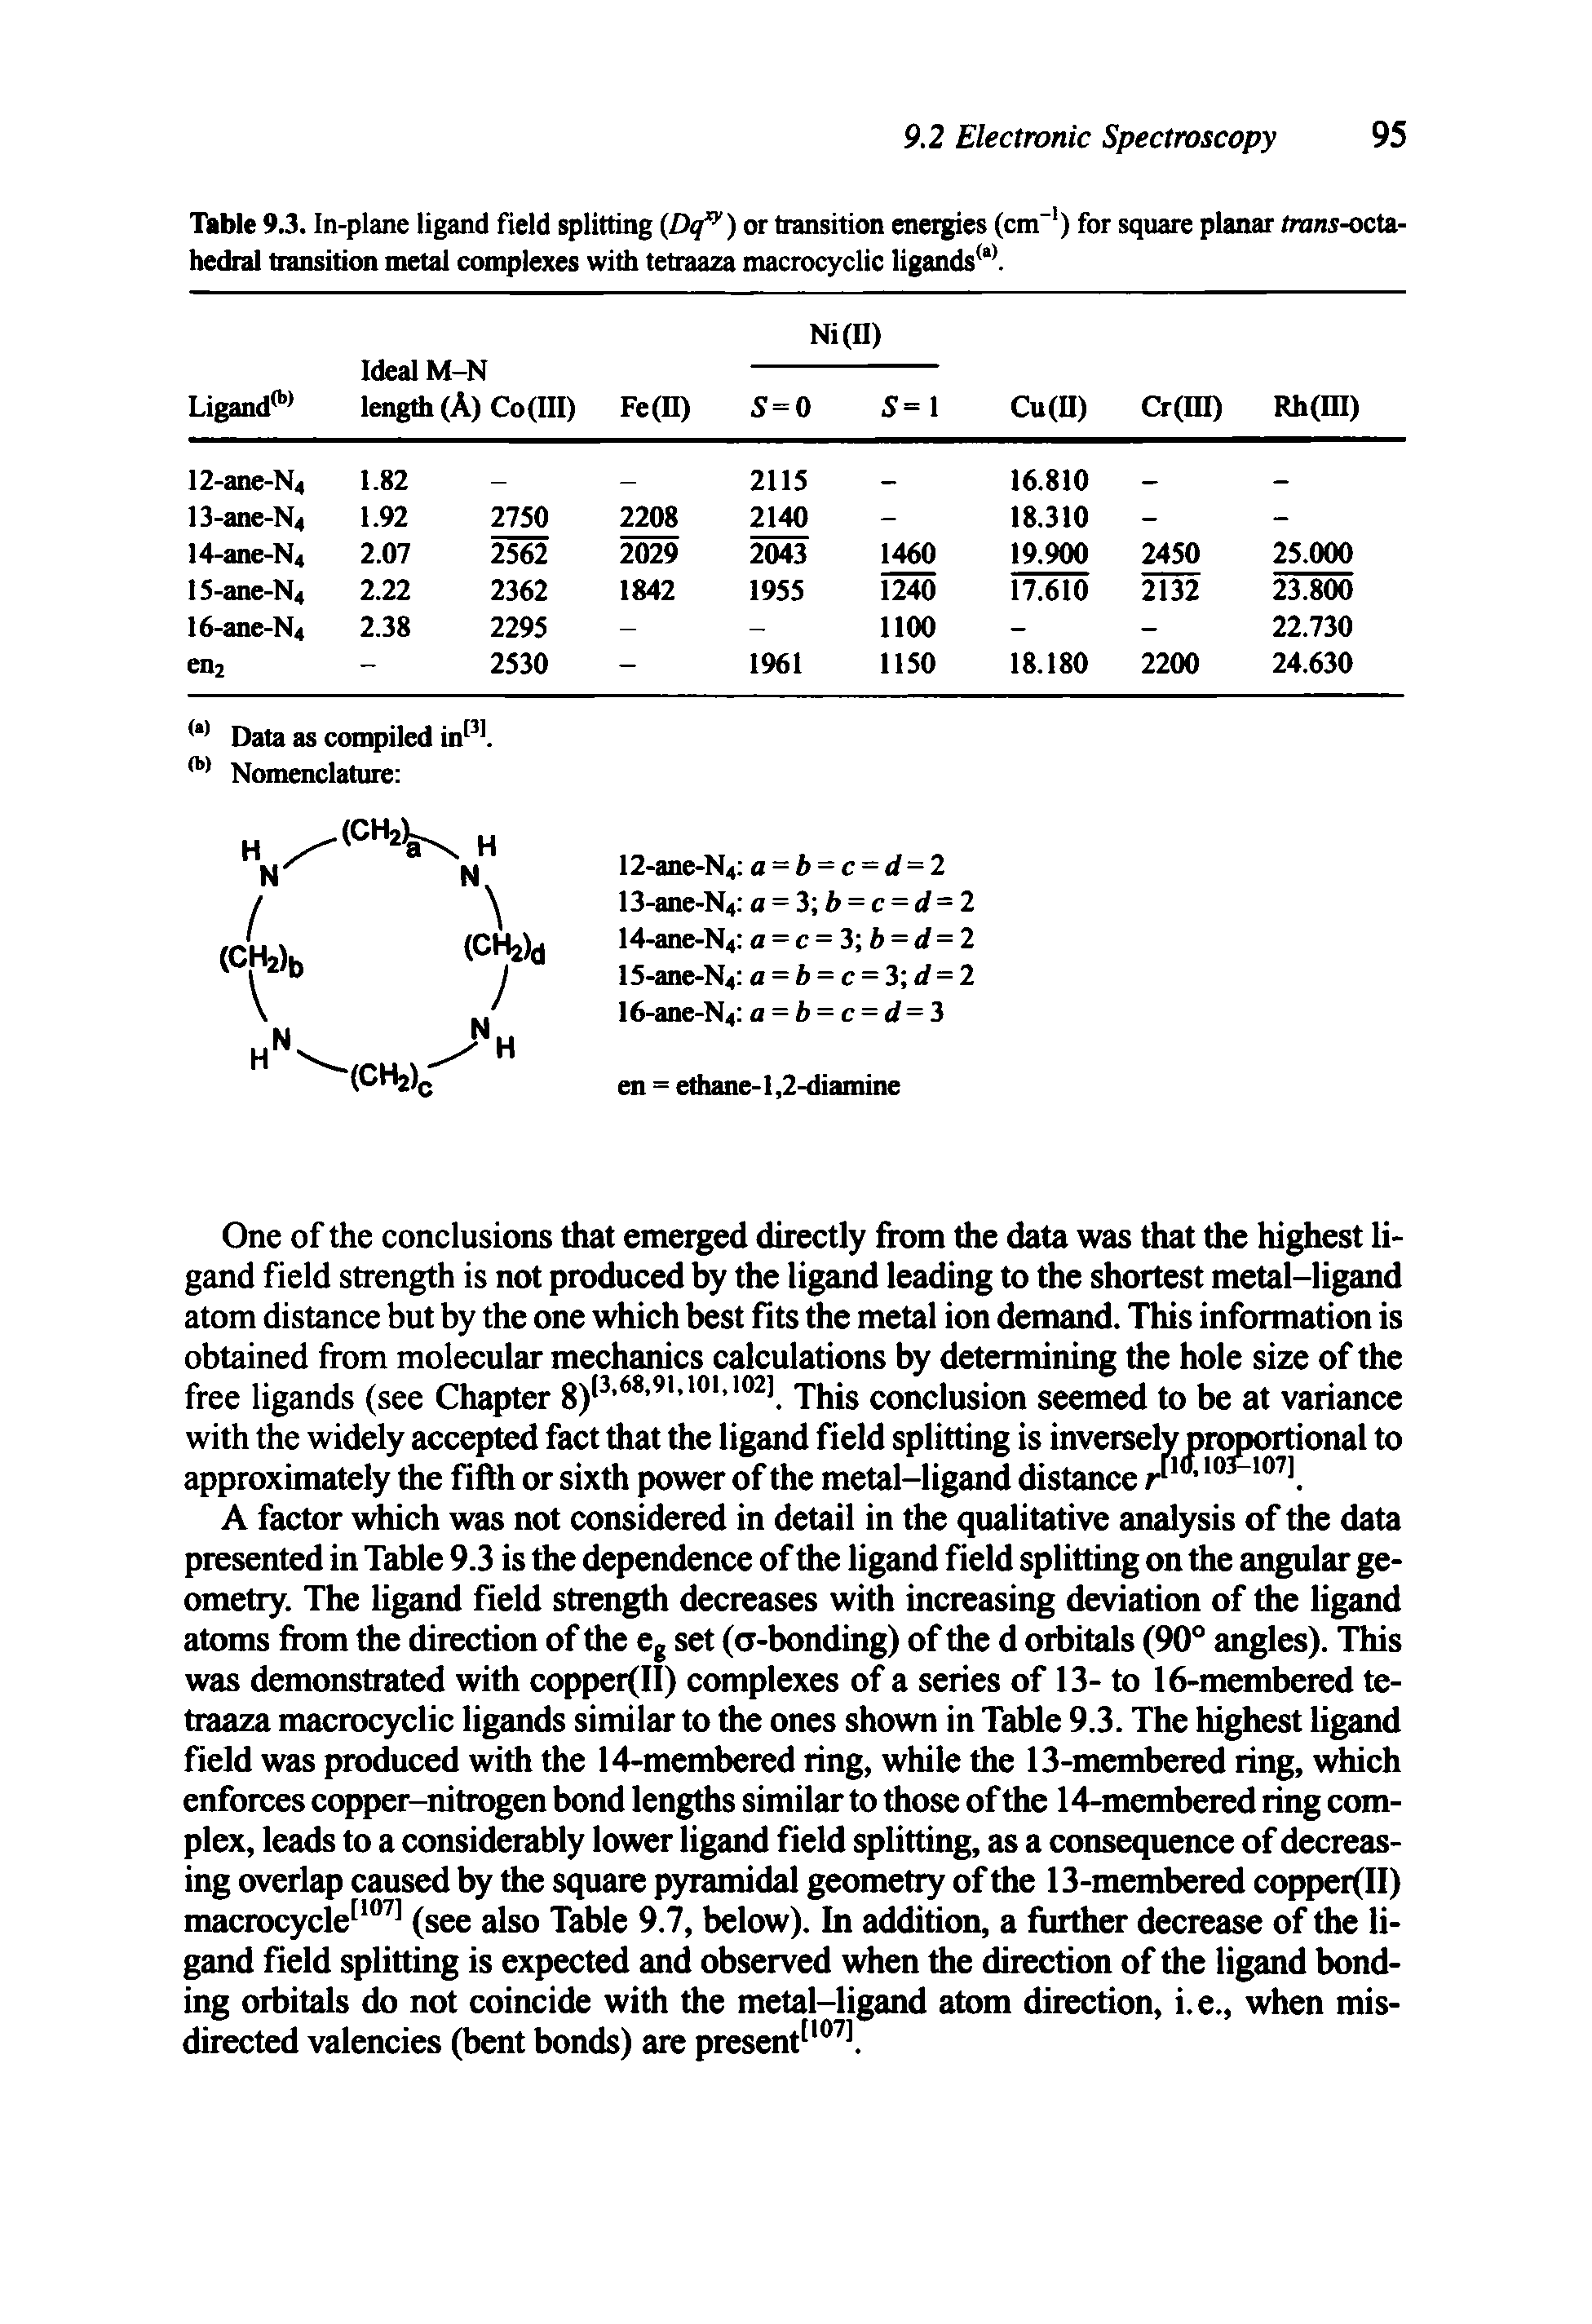 Table 9.3. In-plane ligand field splitting (Dq ) or transition energies (cm ) for square planar trans-octahedral transition metal complexes with tetraaza macrocyclic ligands 1 .